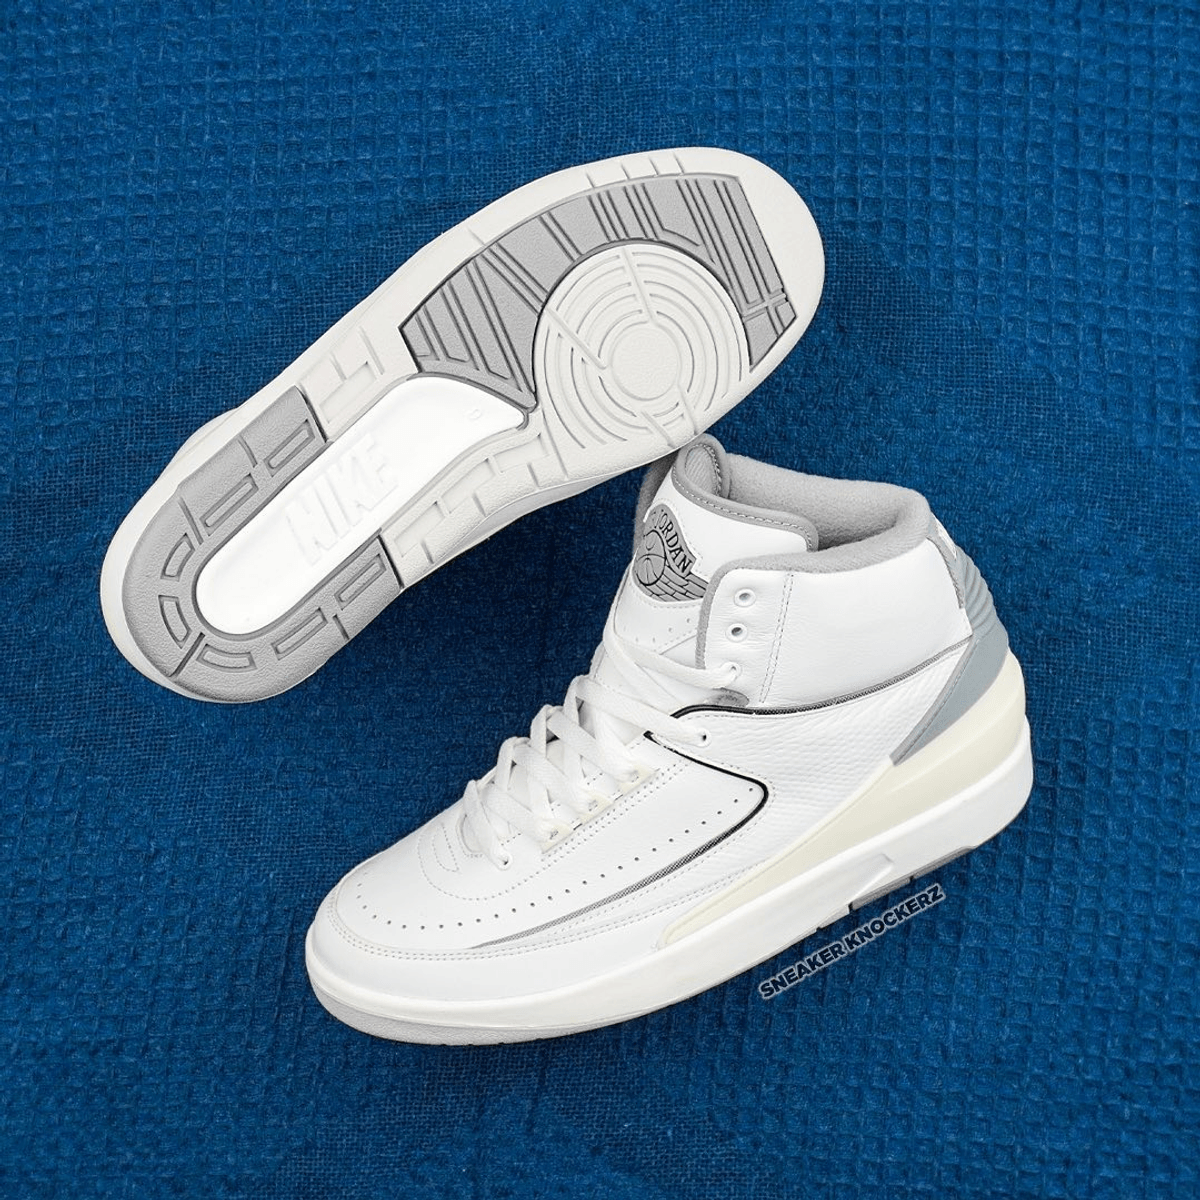 Say Hello To The Air Jordan 2 Neutral Grey Releasing In 2023